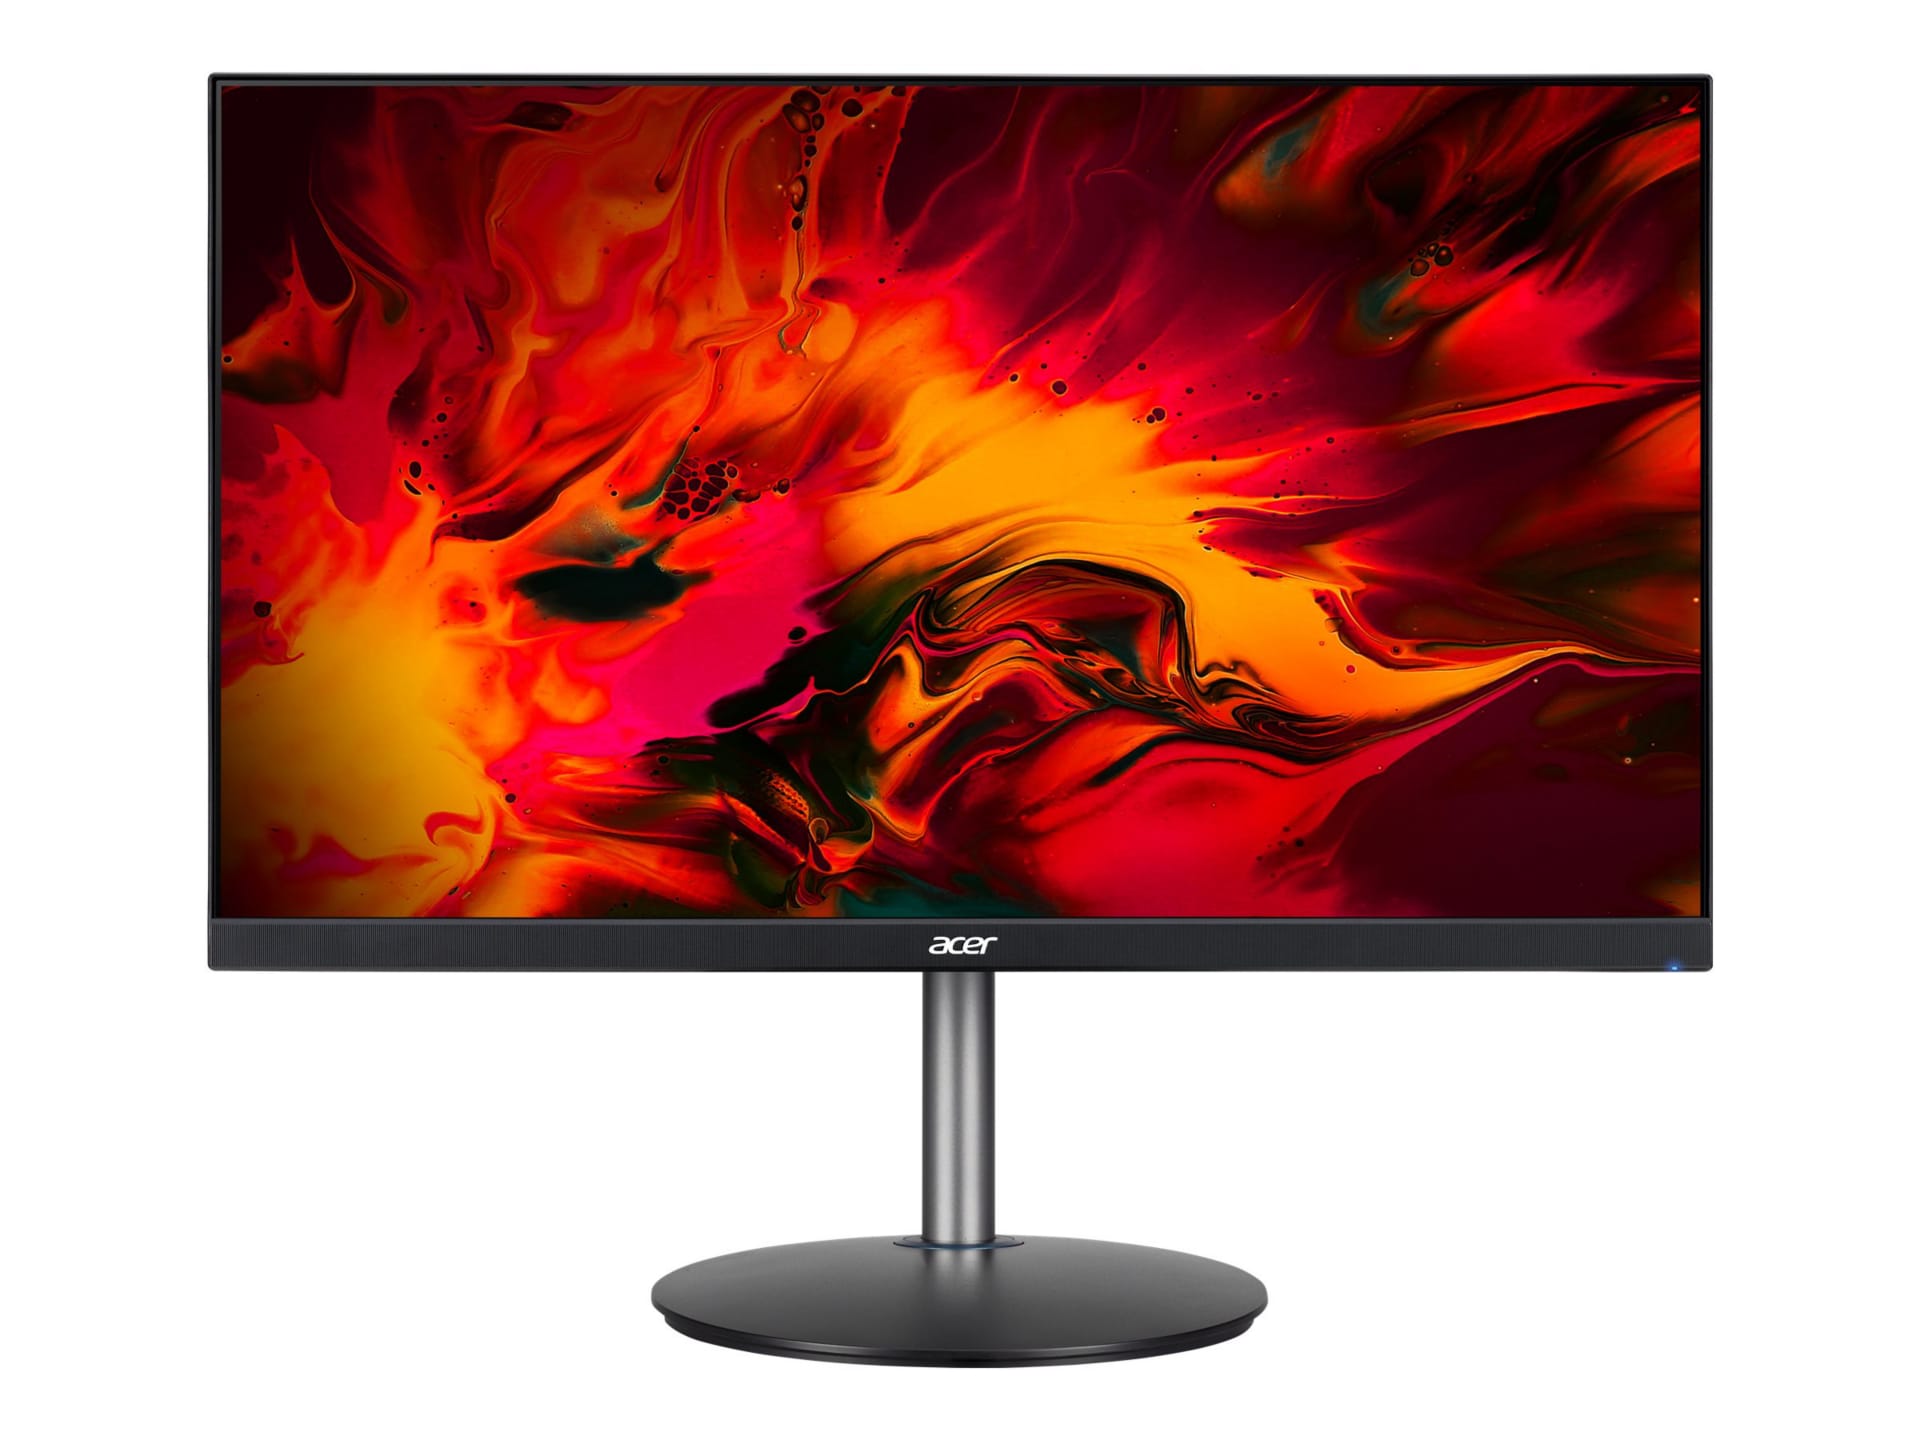 Acer Nitro XF243Y Pbmiiprx - XF3 Series - LED monitor - Full HD (1080p) - 23.8" - HDR